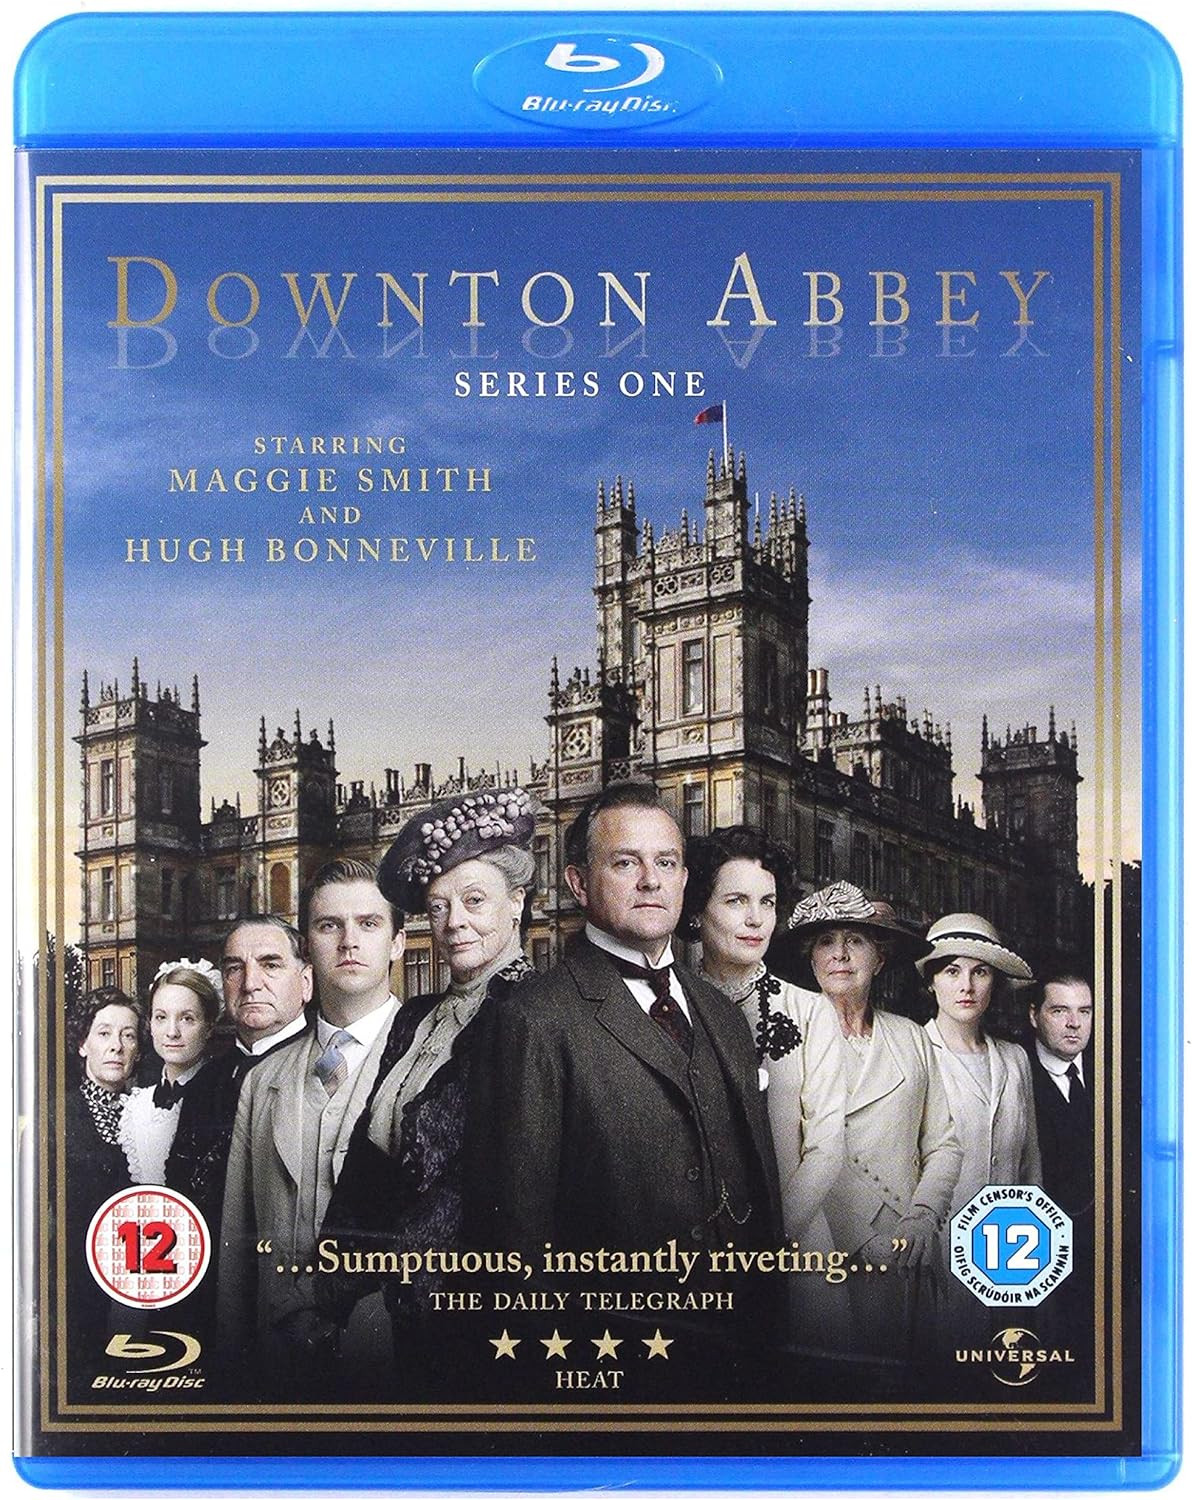 Image of Downton Abbey Series 1